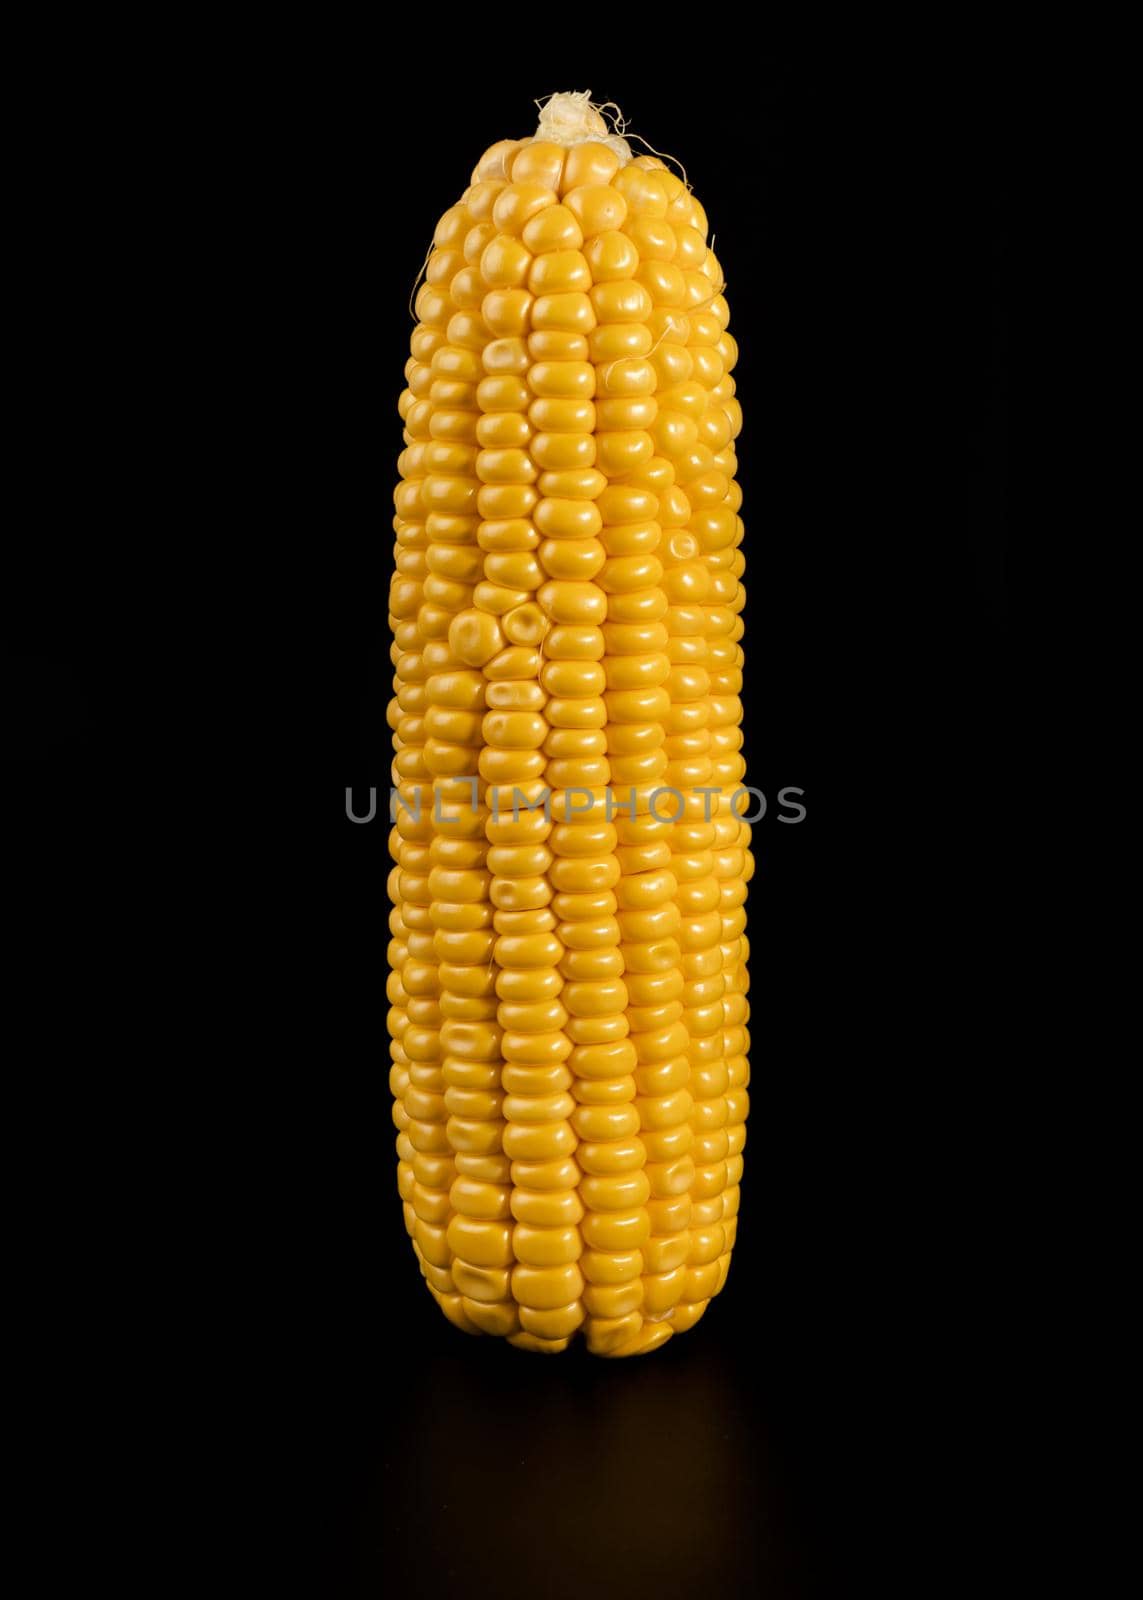 A swing of ripe corn separated from a husk on a black background